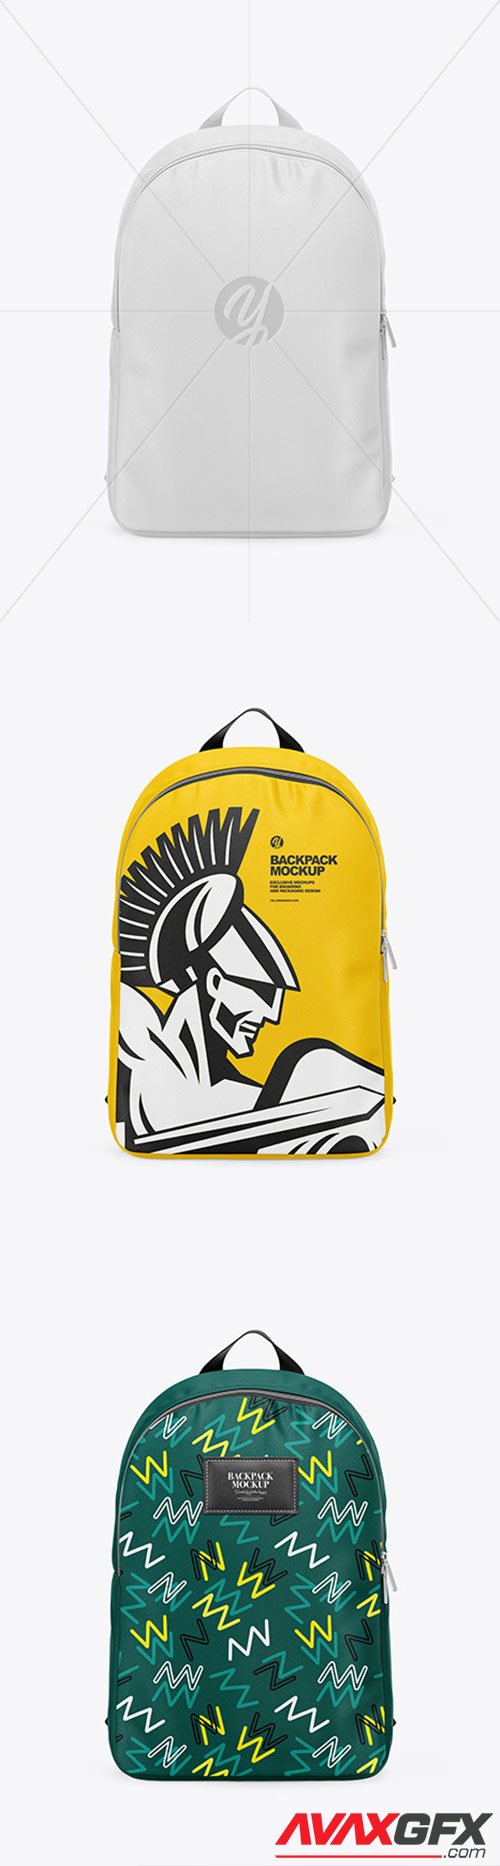 Backpack Mockup - Front View 62756